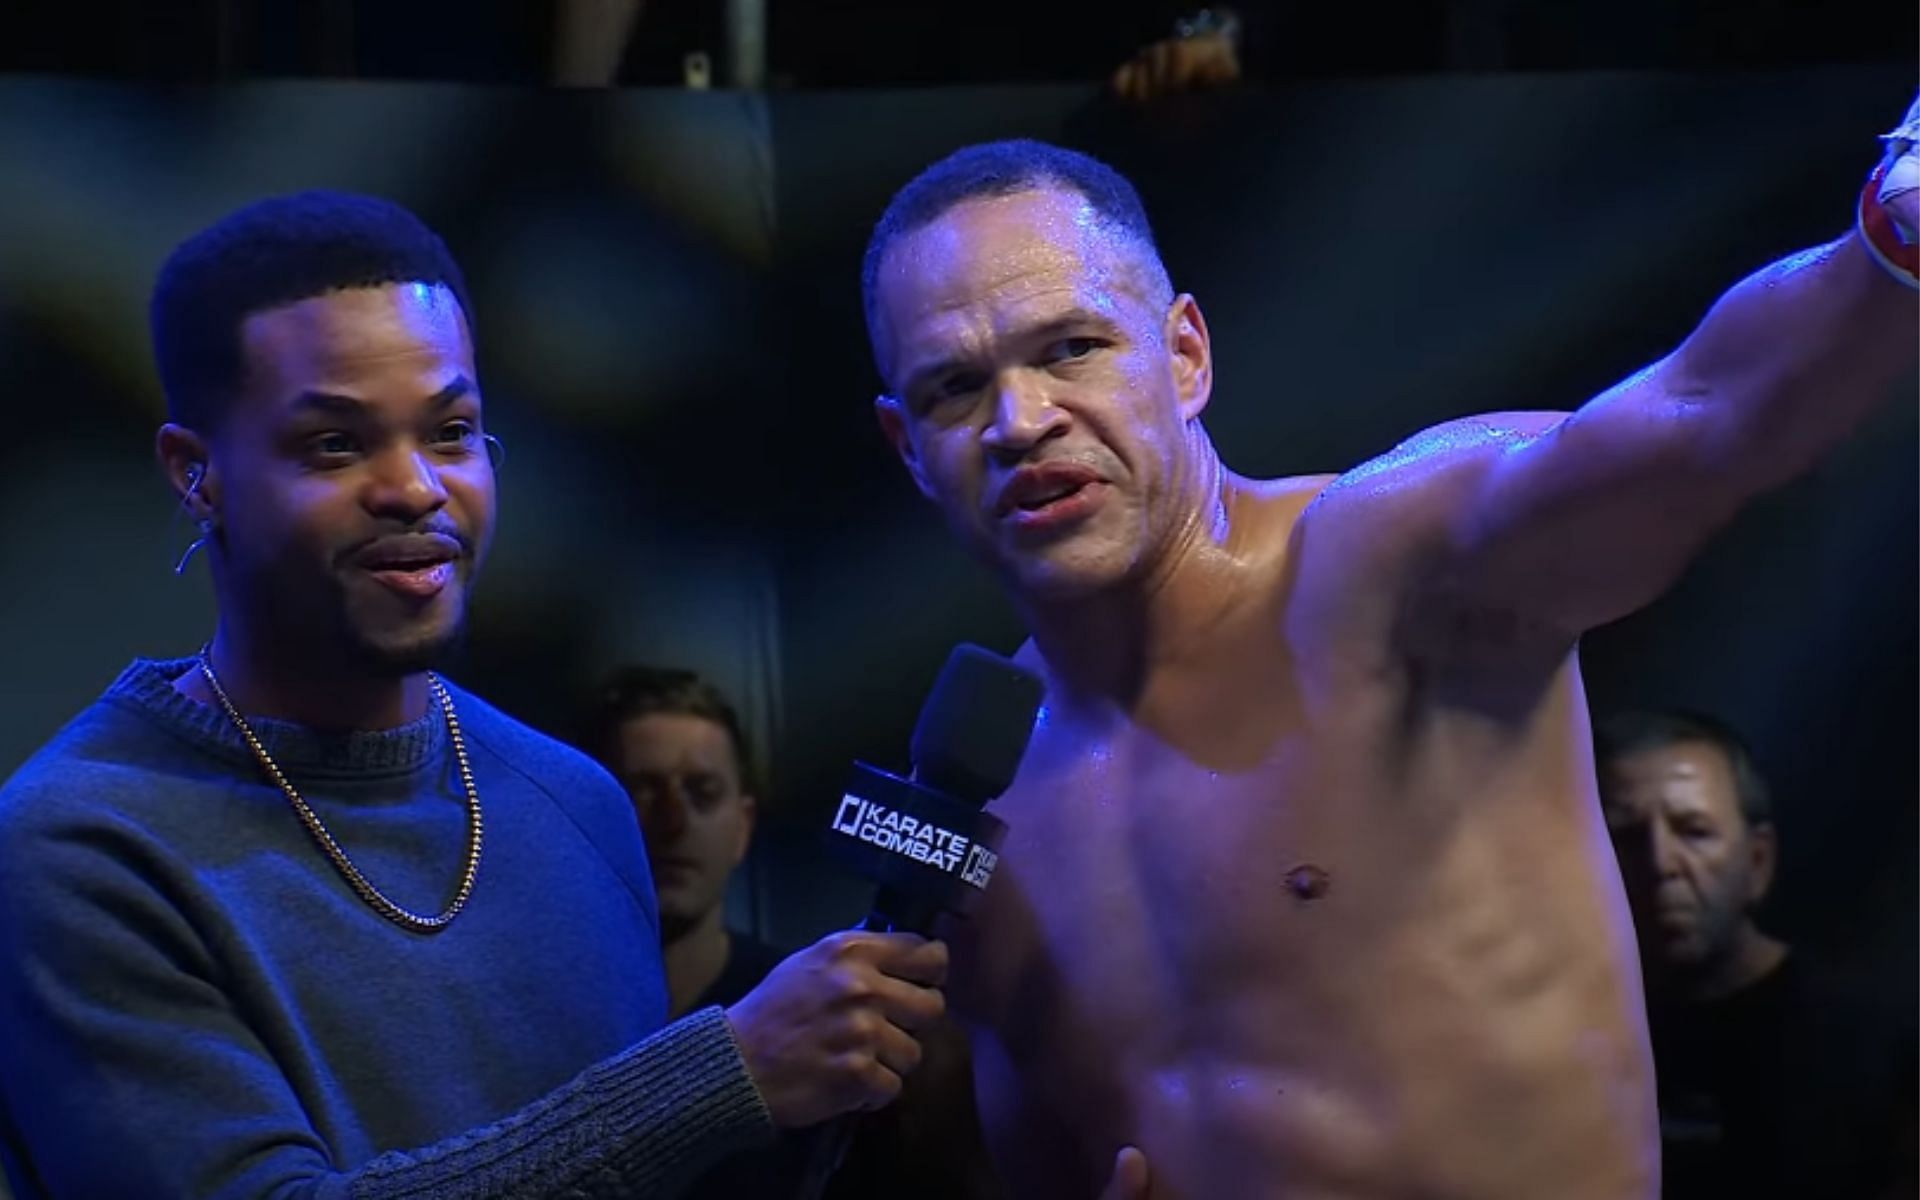 Raymond Daniels [Pictured] called out two former UFC champions following his KC 43 win [Image courtesy: Karate Combat - YouTube]